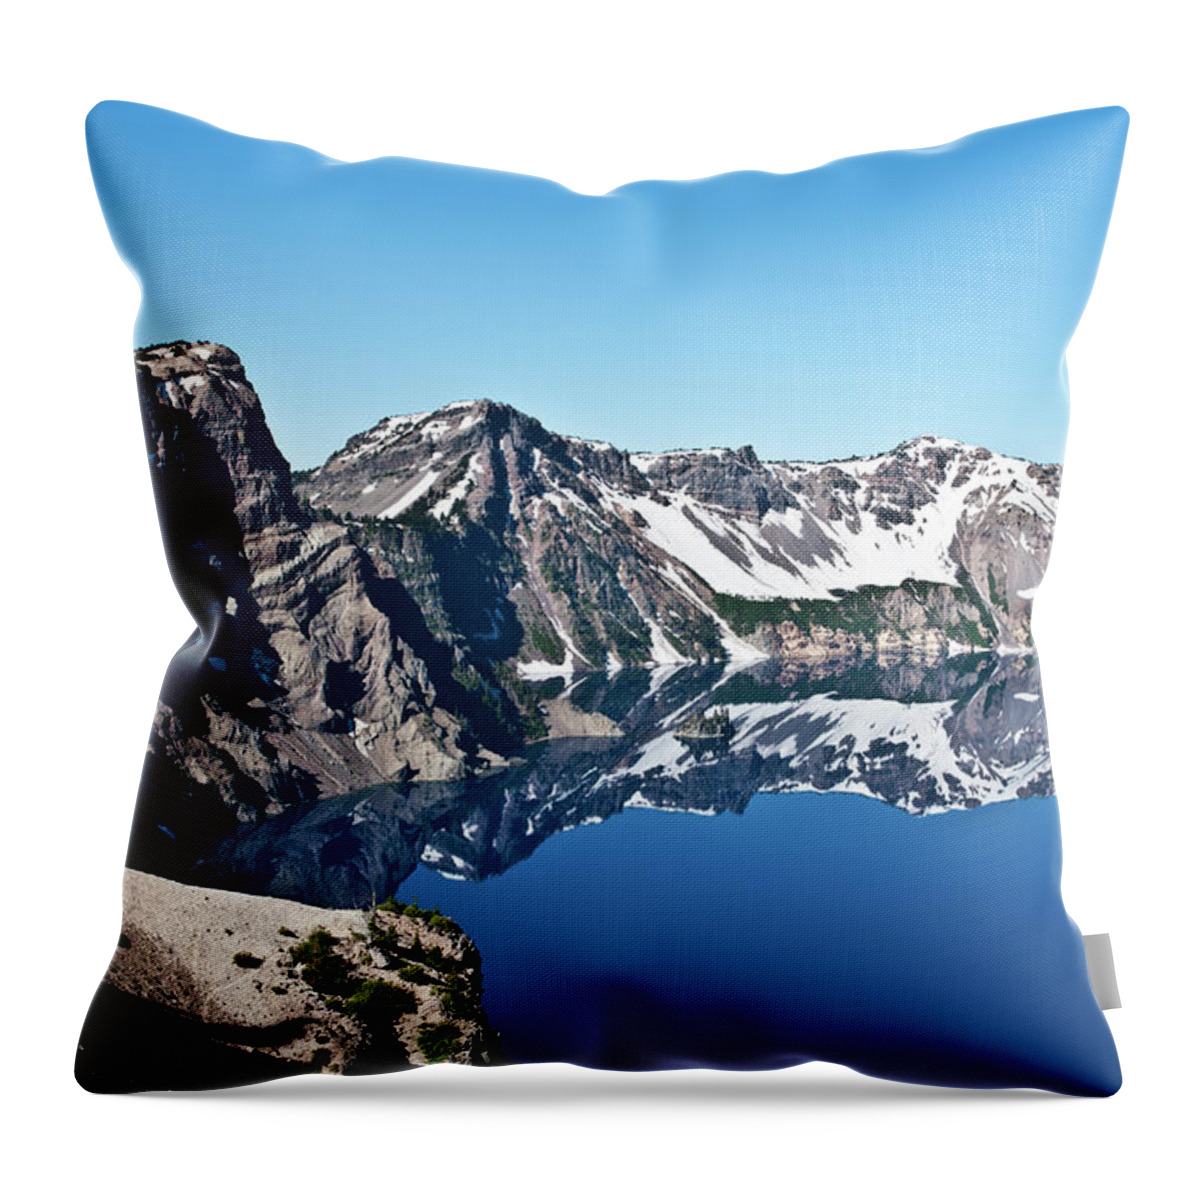 Crater Lake Throw Pillow featuring the photograph Crater Lake Preview by Www.bazpics.com